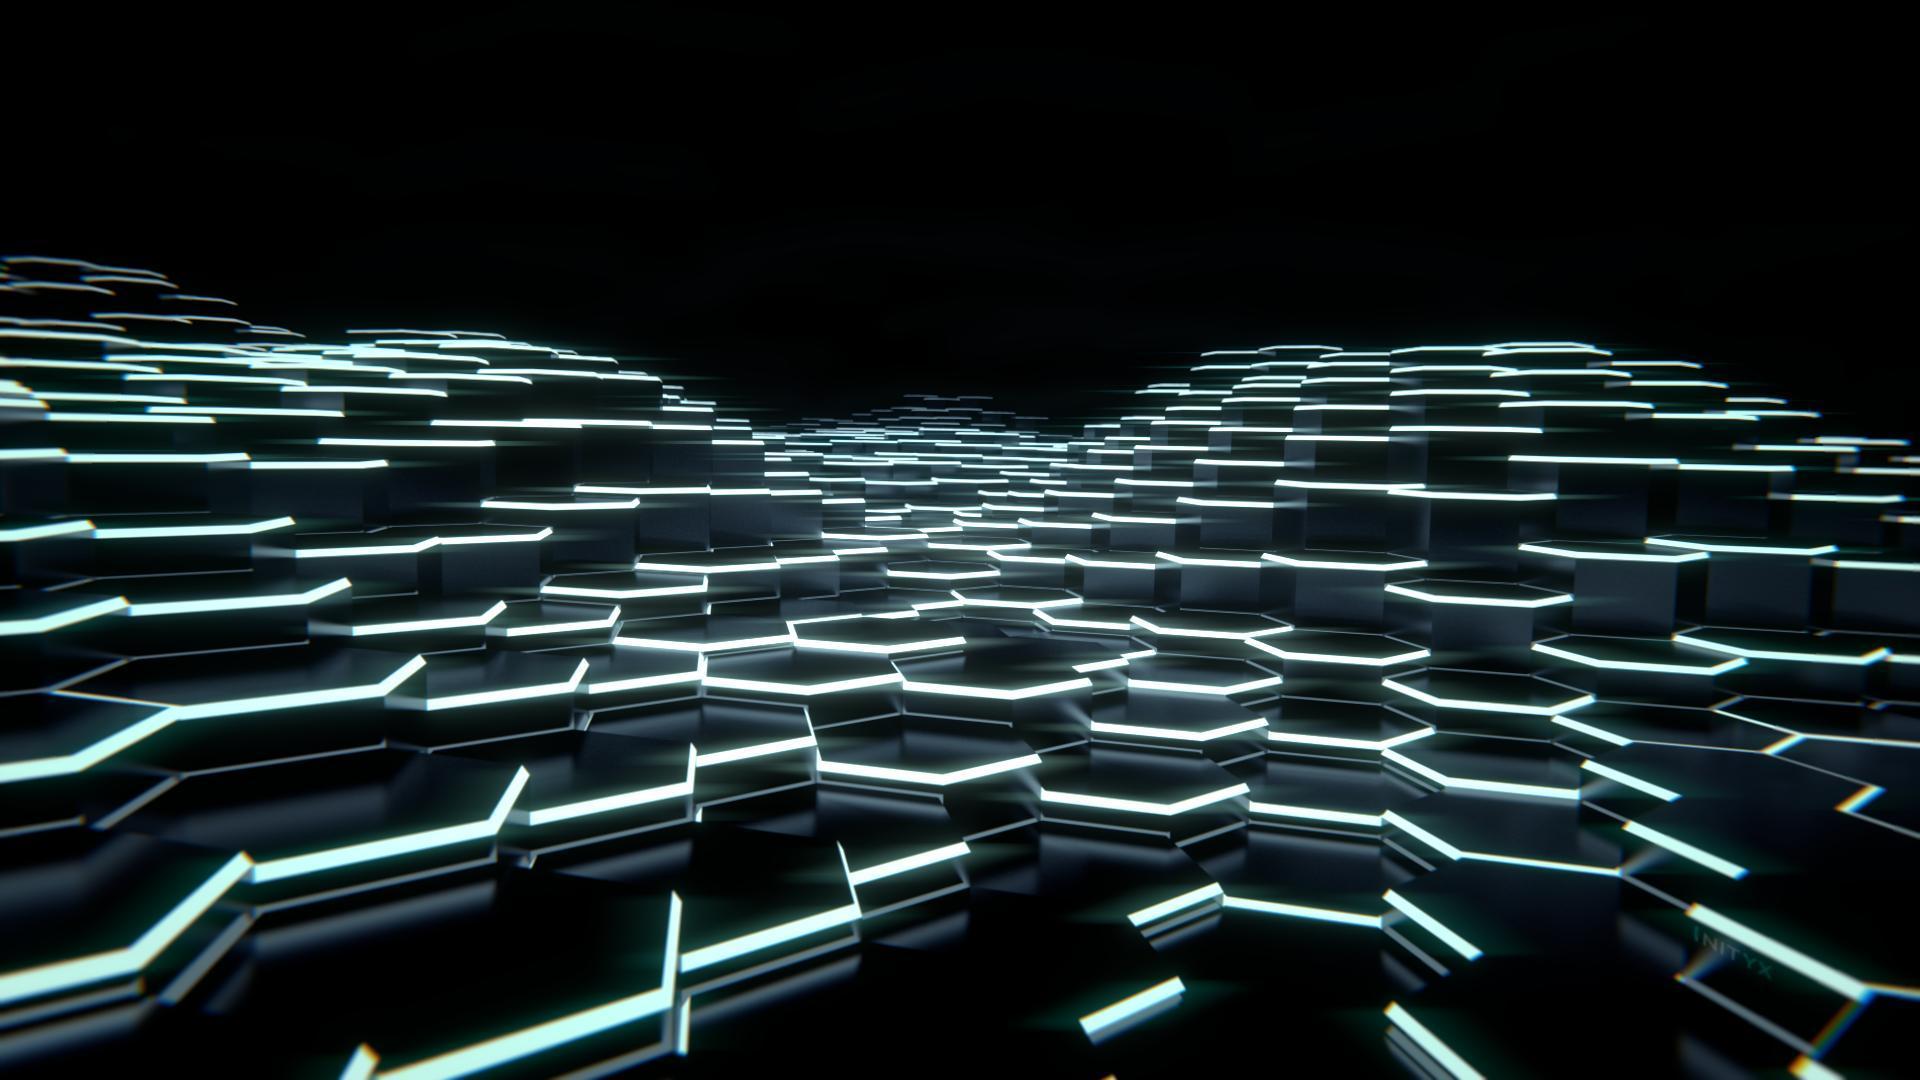 Tron Legacy Backgrounds 1920x1080